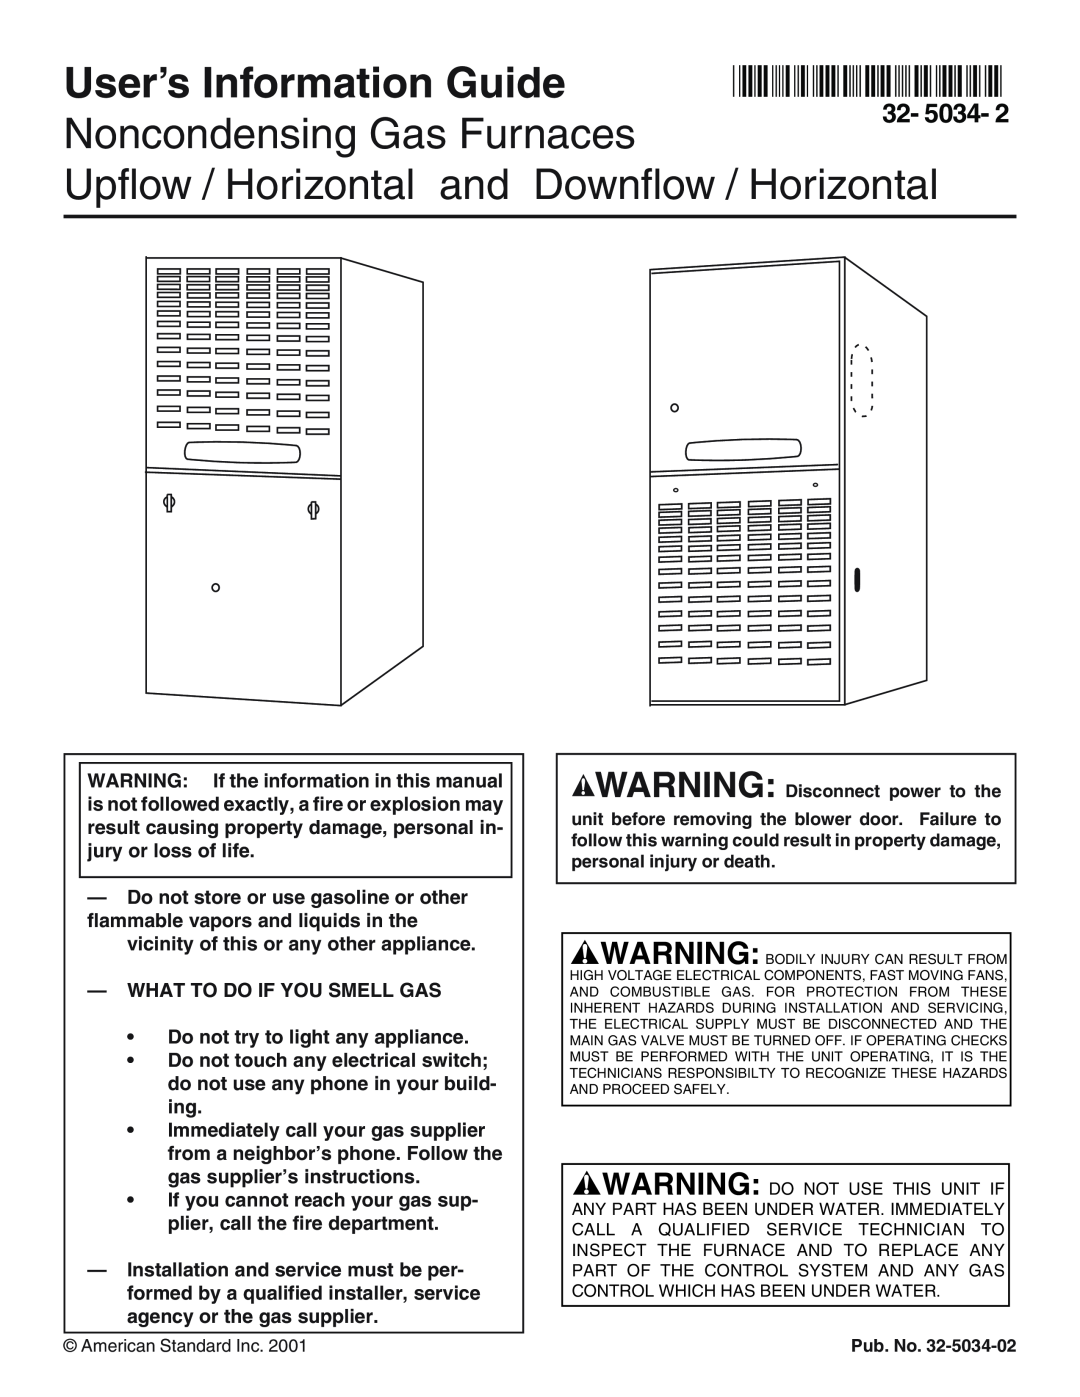 American Standard Noncondensing Gas Furnaces manual User’s Information Guide 